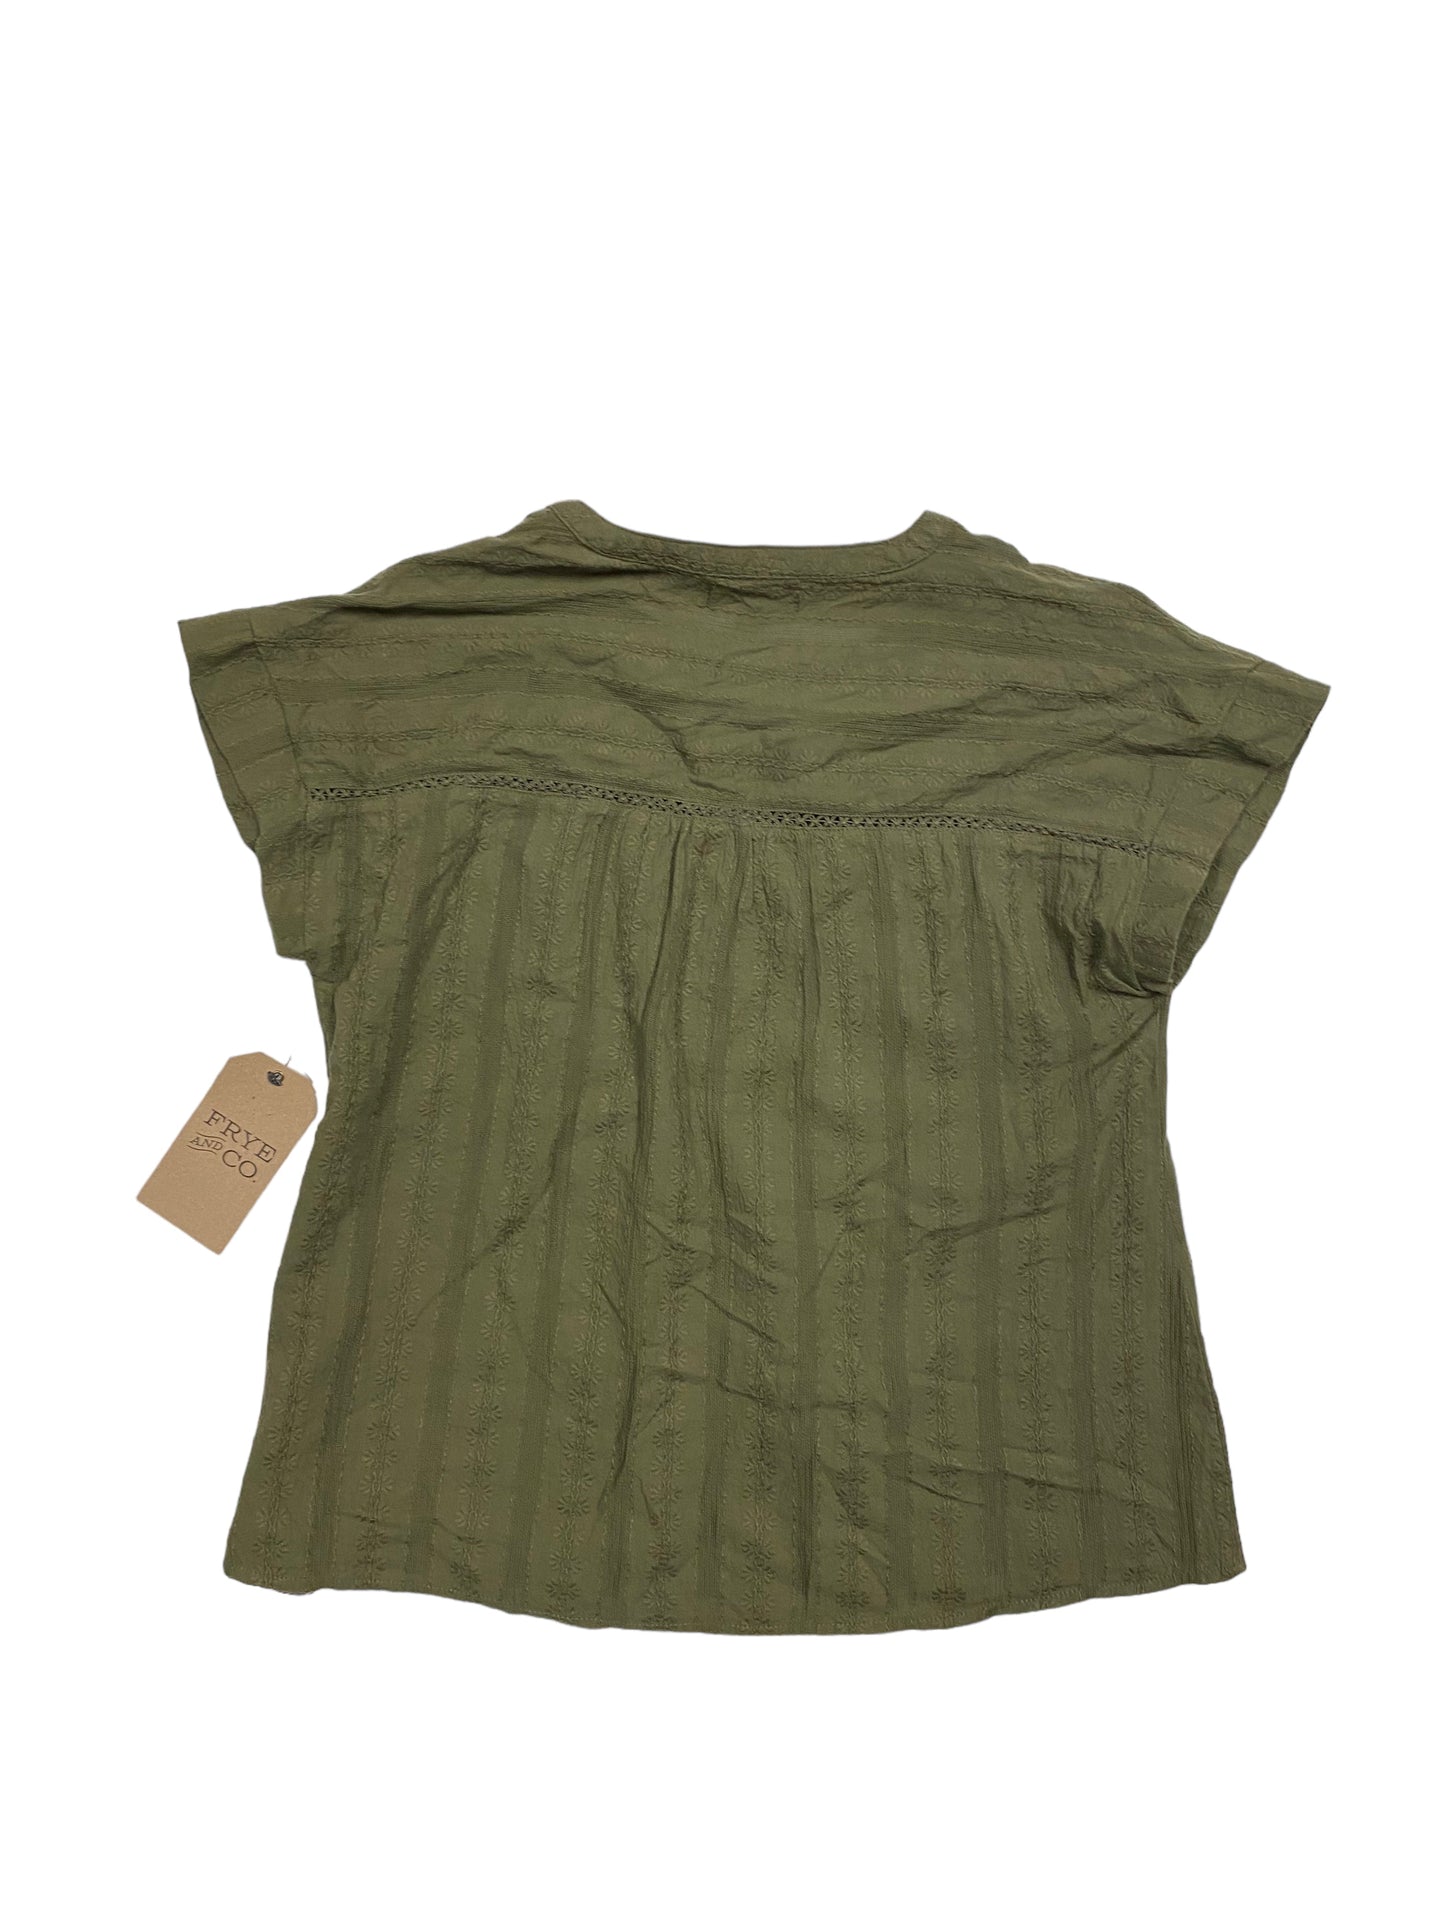 Green Top Short Sleeve Frye And Co, Size M